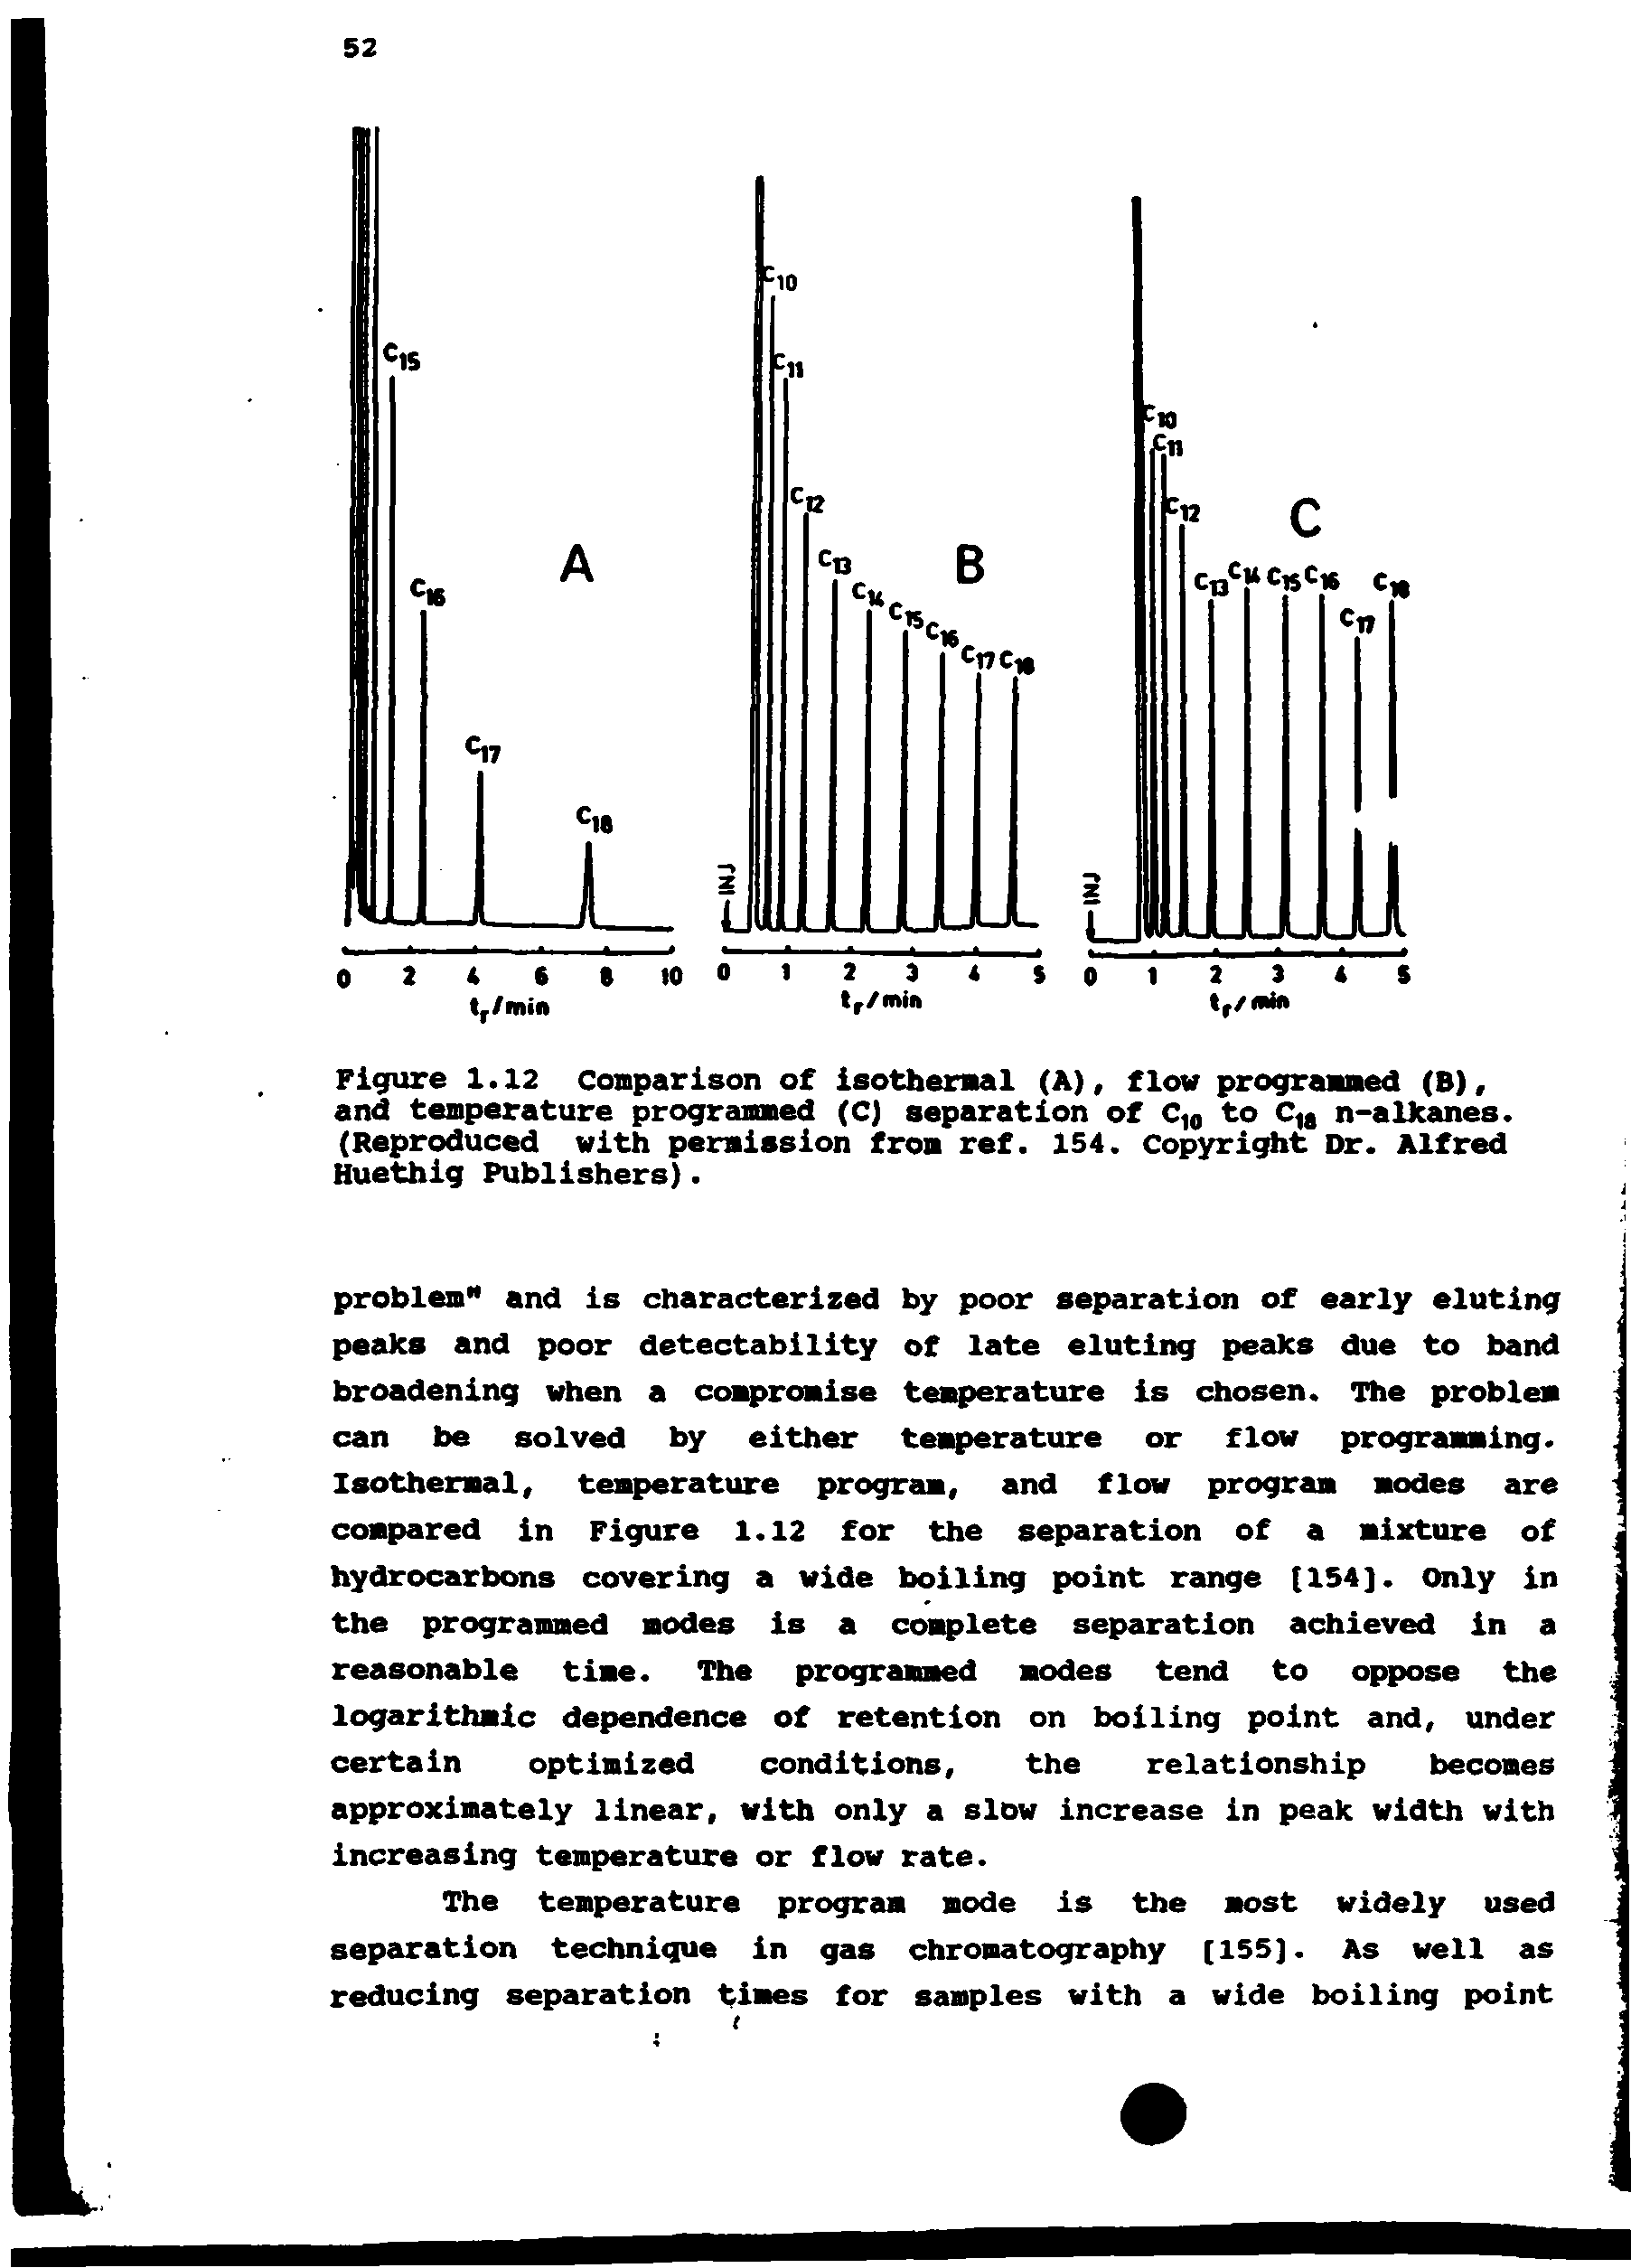 Figure 1.12 Comparison of isothermal (A), flow programmed (B), and temperature programmed (C) separation of C g to n-alkanes. (Reproduced with permission from ref. 154. Copyri t Dr. Alfred Huethig Publishers).